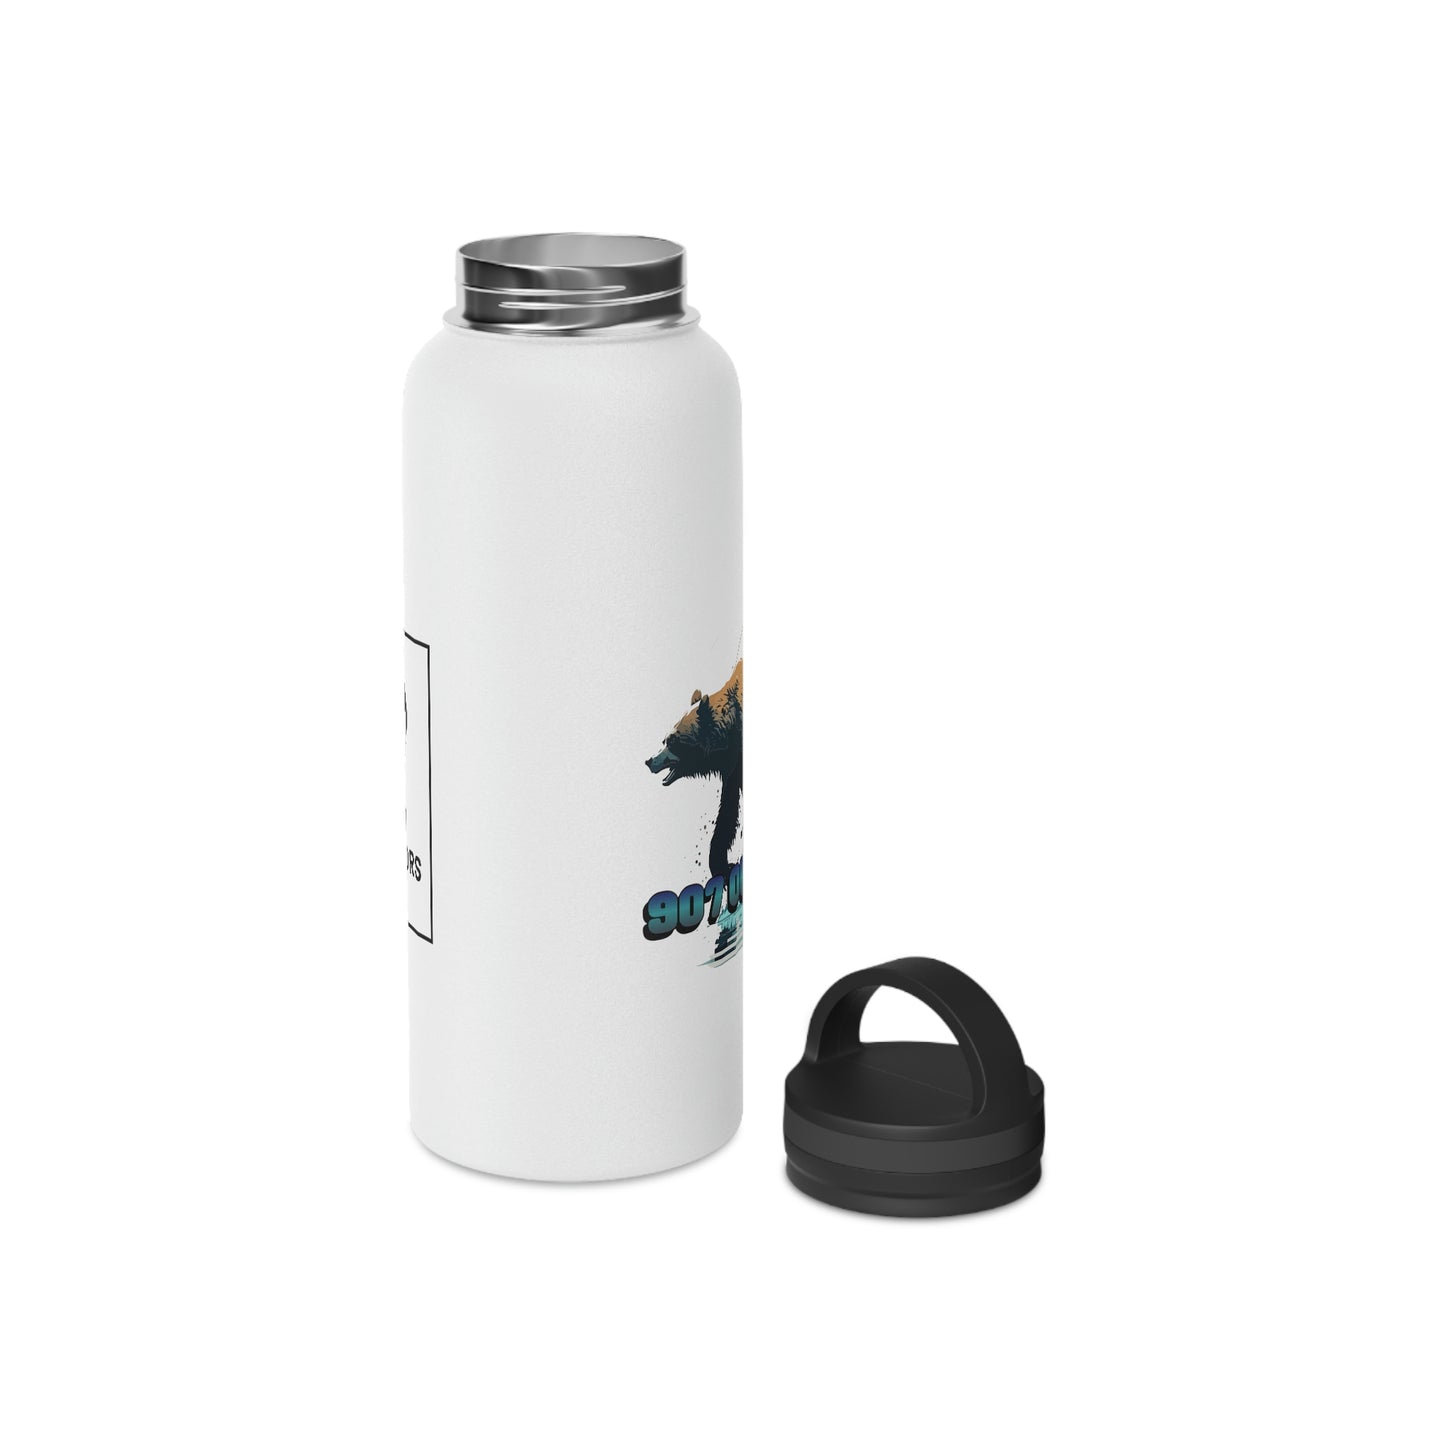 River Bear Stainless Steel Water Bottle, Handle Lid - 907Outdoors